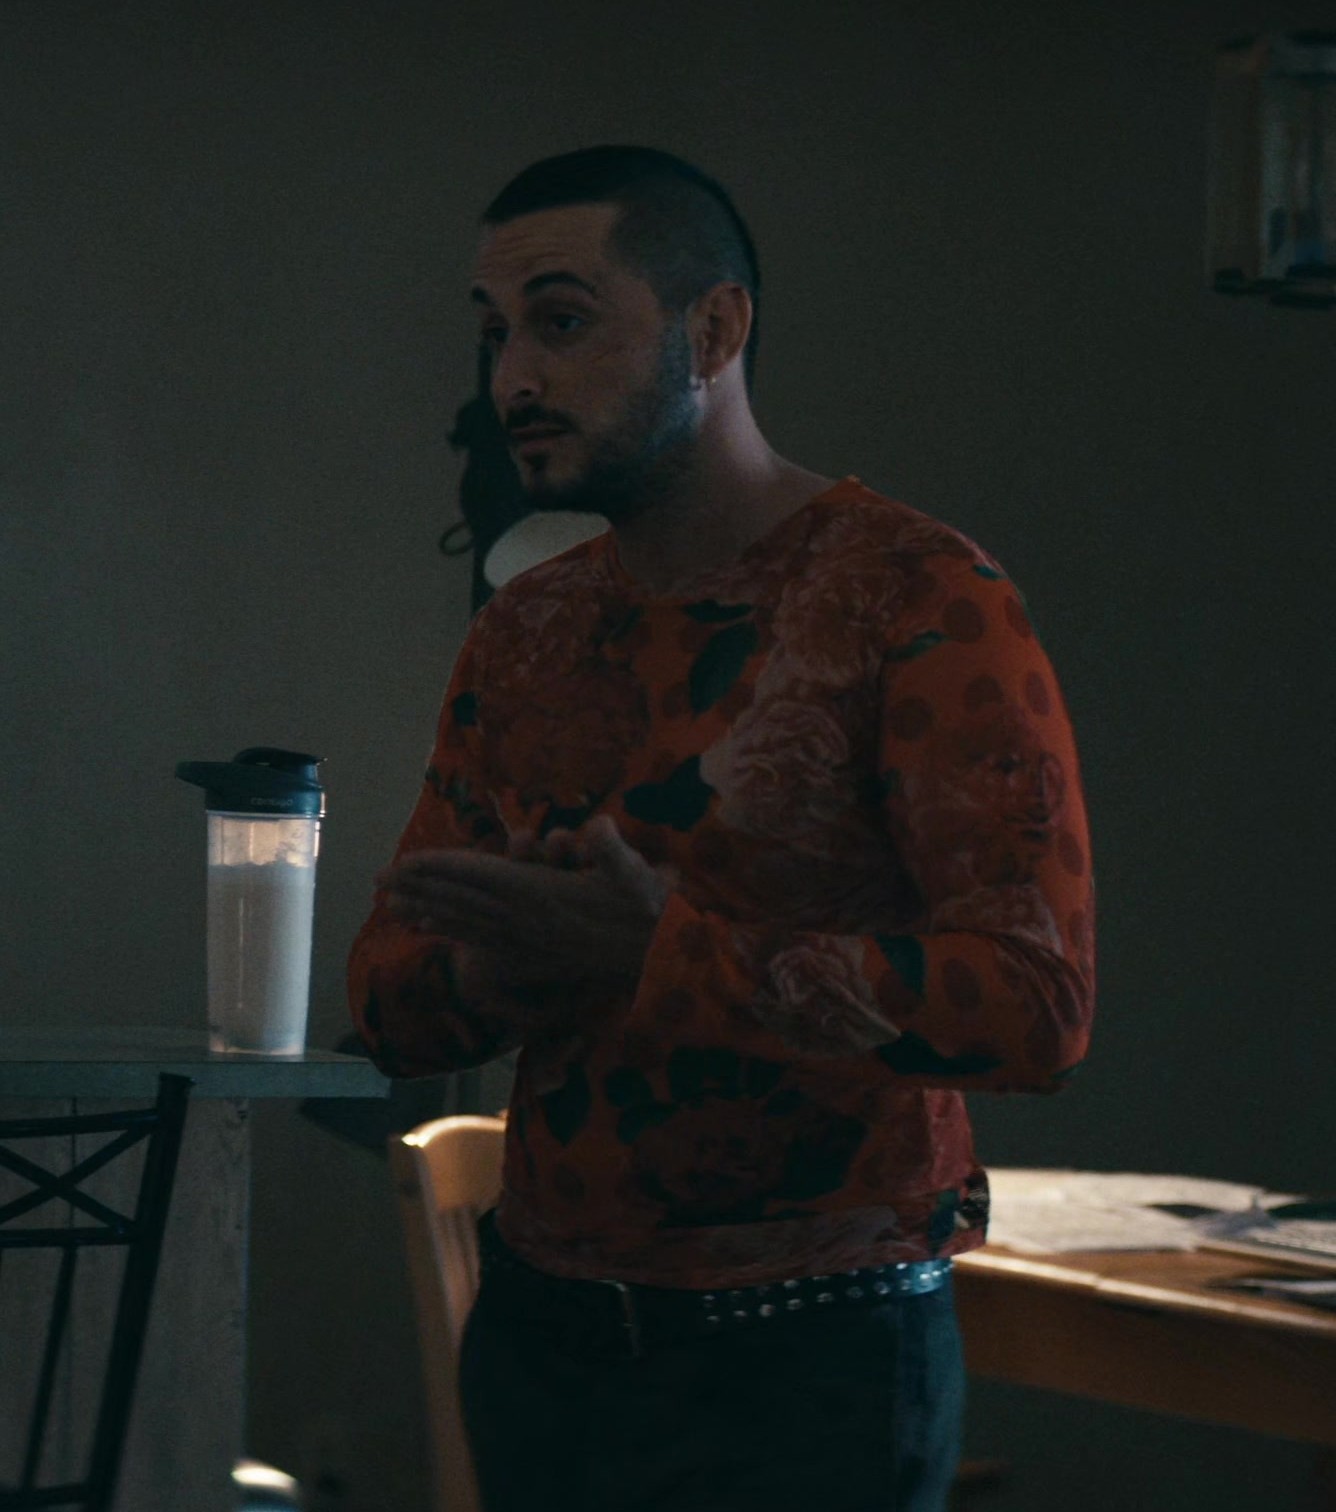 Worn on The Boys TV Show - Red Floral Long Sleeve Top of Tomer Capone as Serge / Frenchie